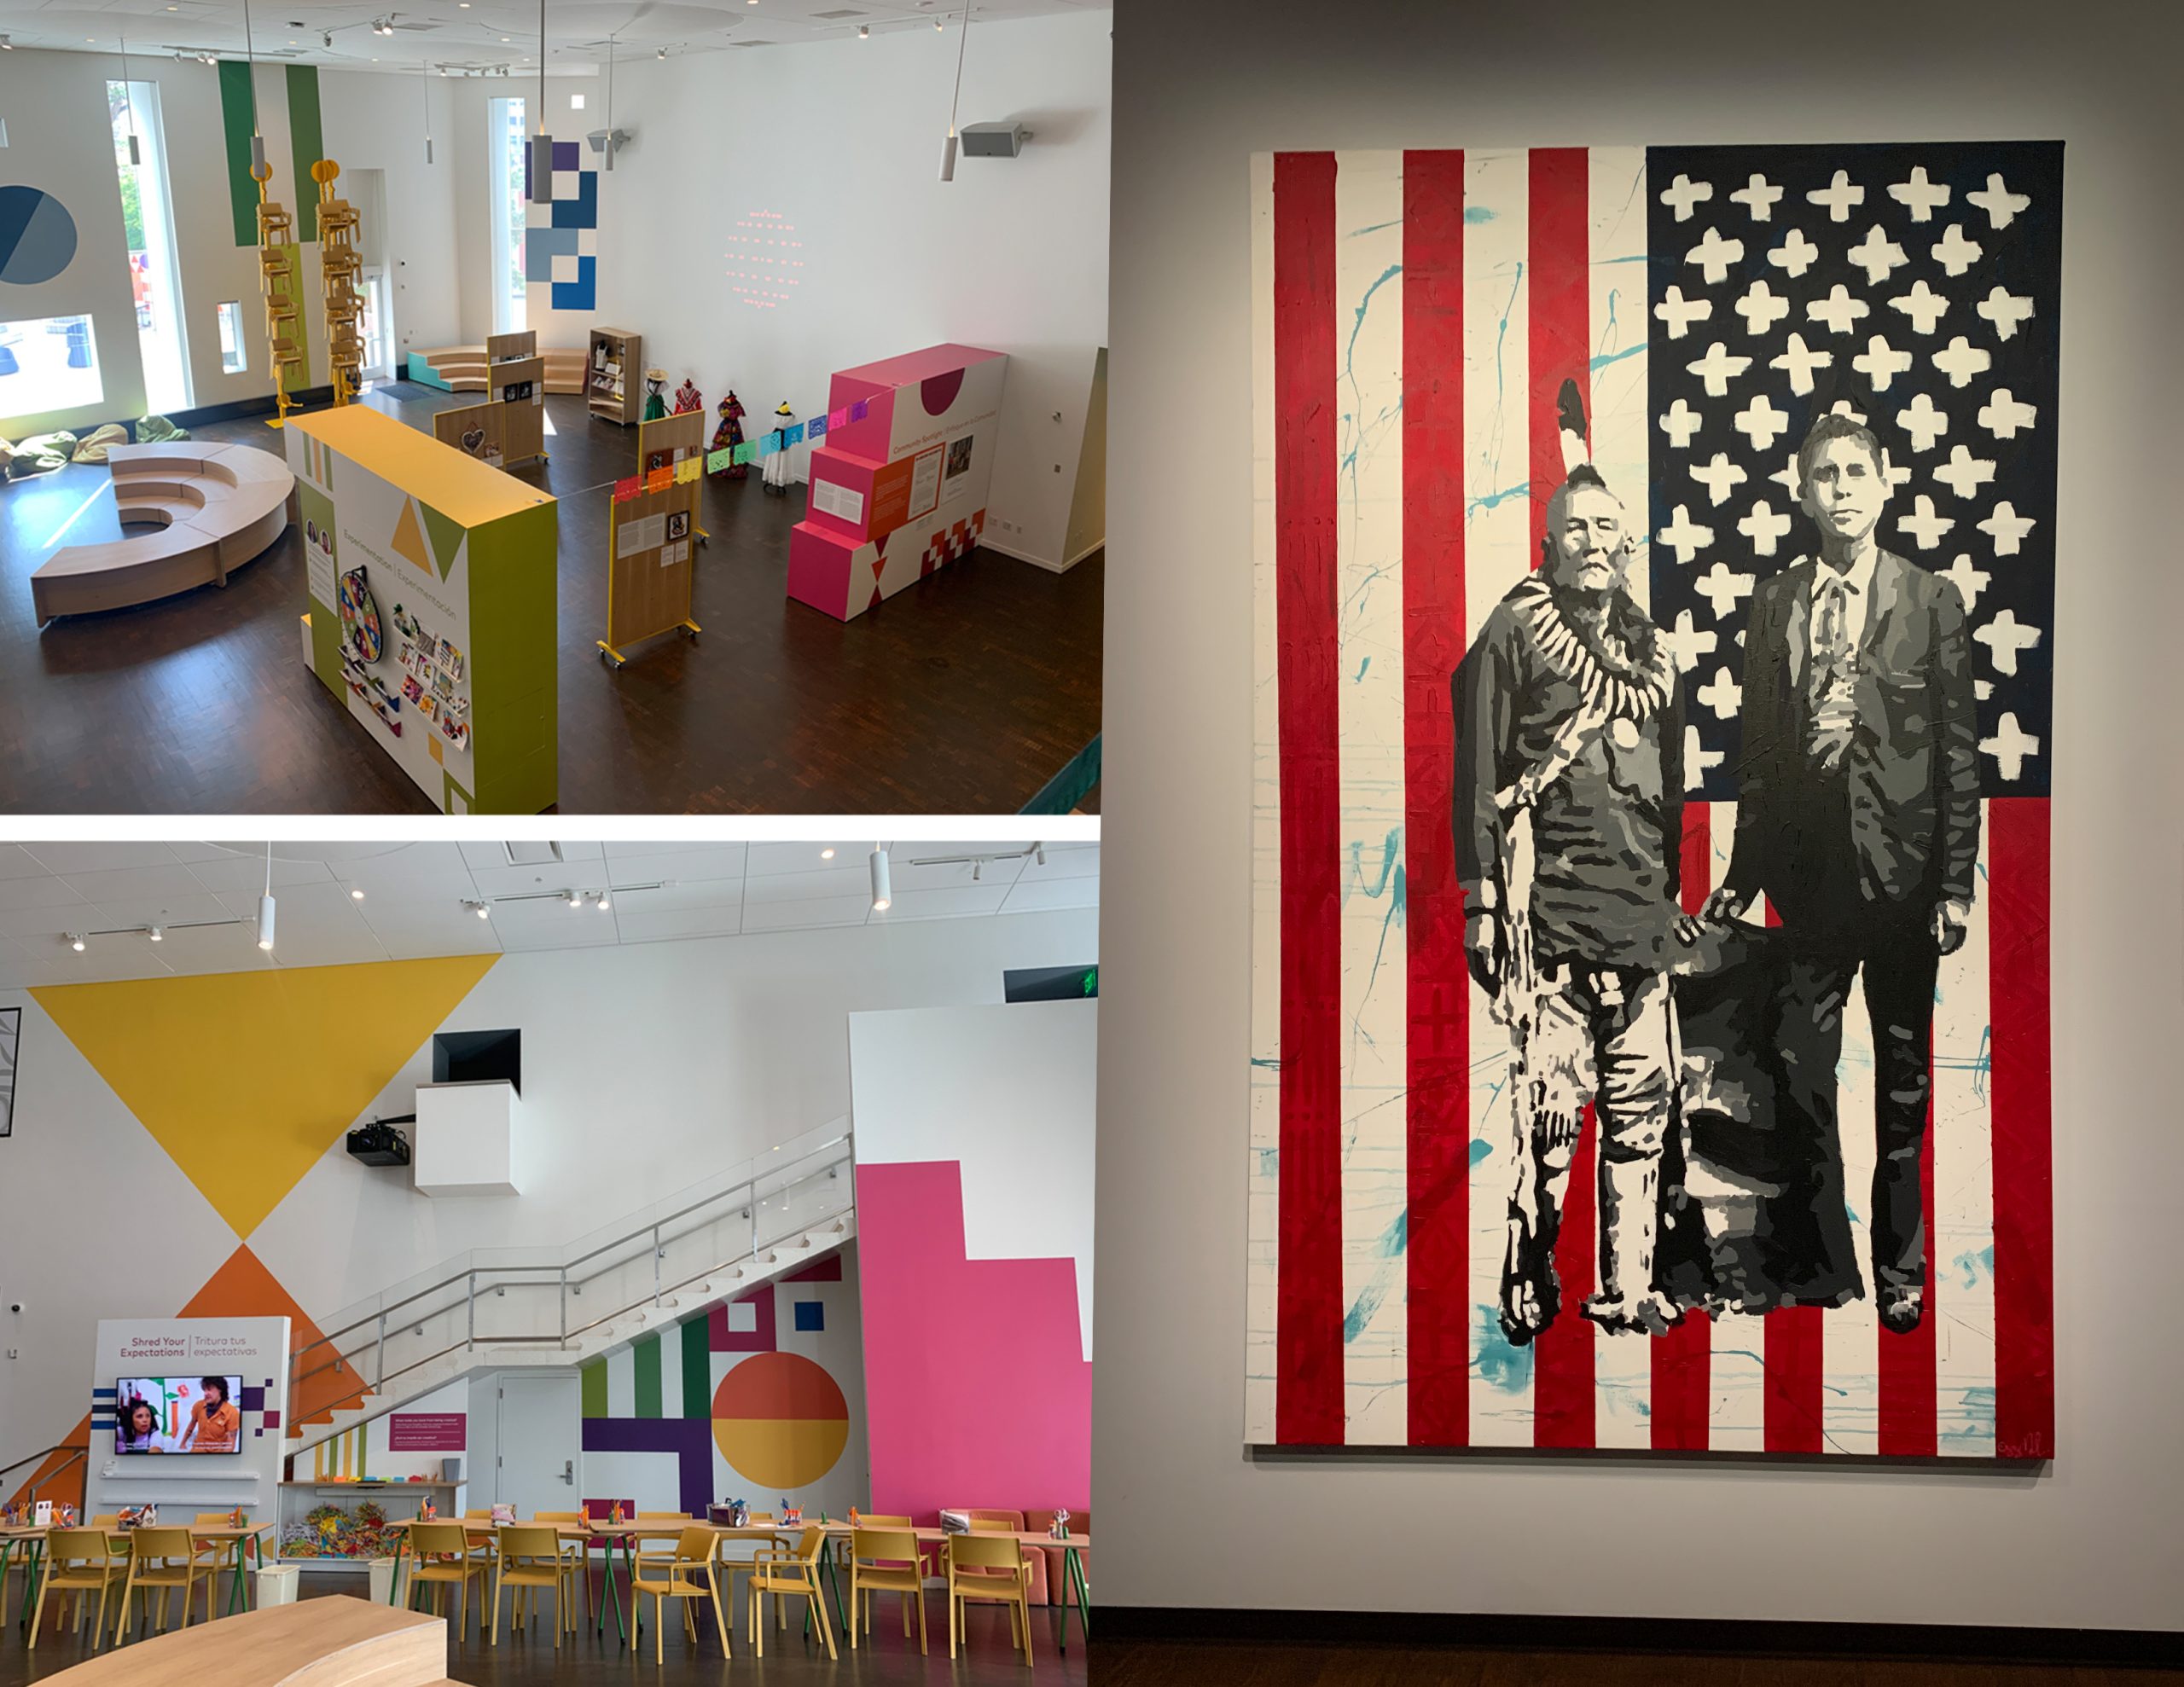 The image is sectioned in two parts, the right side depicts two views of an interactive, hands-on space at the Denver Art Museum with colorful blocks of color adorning on the walls. The space is filled with uniquely shaped furniture and art materials. The left part of the image shows an Indigenous man standing with a man in a suit, but both figures are painted atop a facade of the American flag. The painting was created by artist Gregg Deal. 